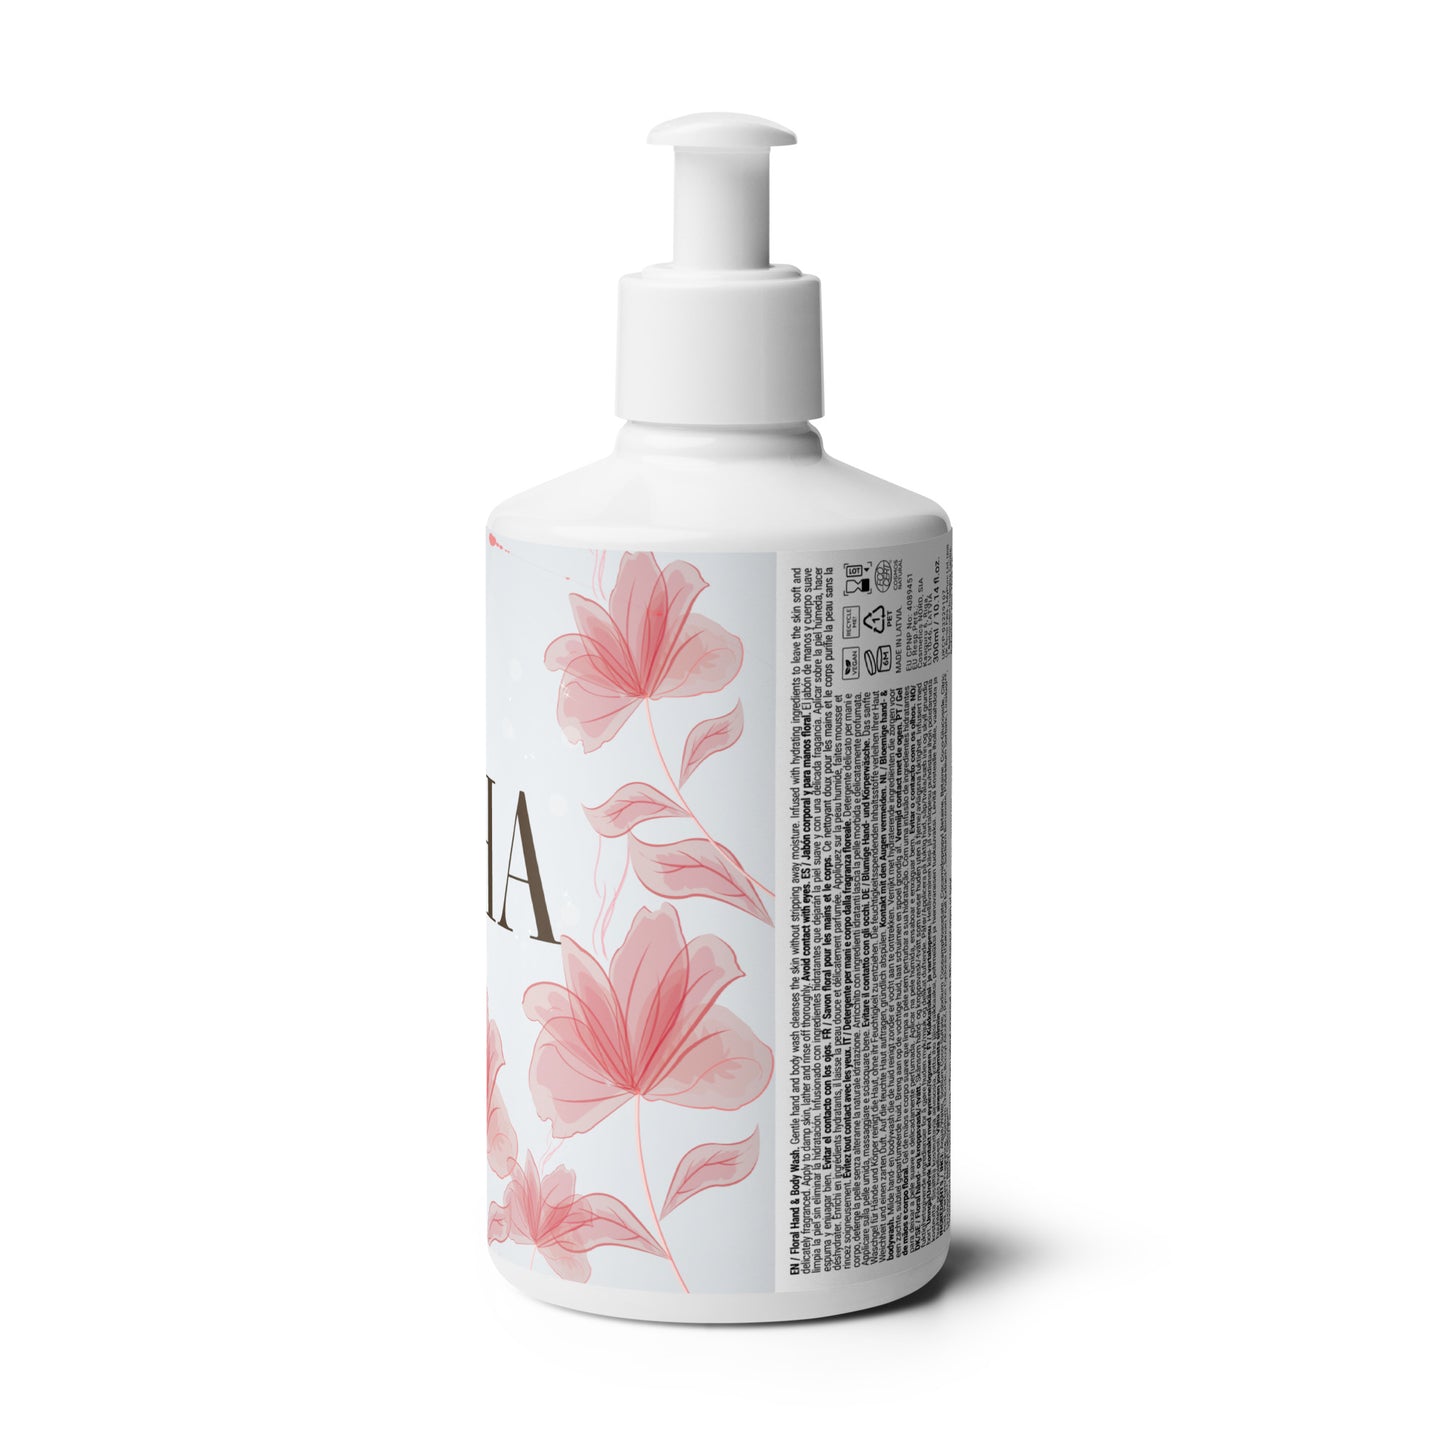 ADELPHA Floral Hand & Body Wash 300 ml